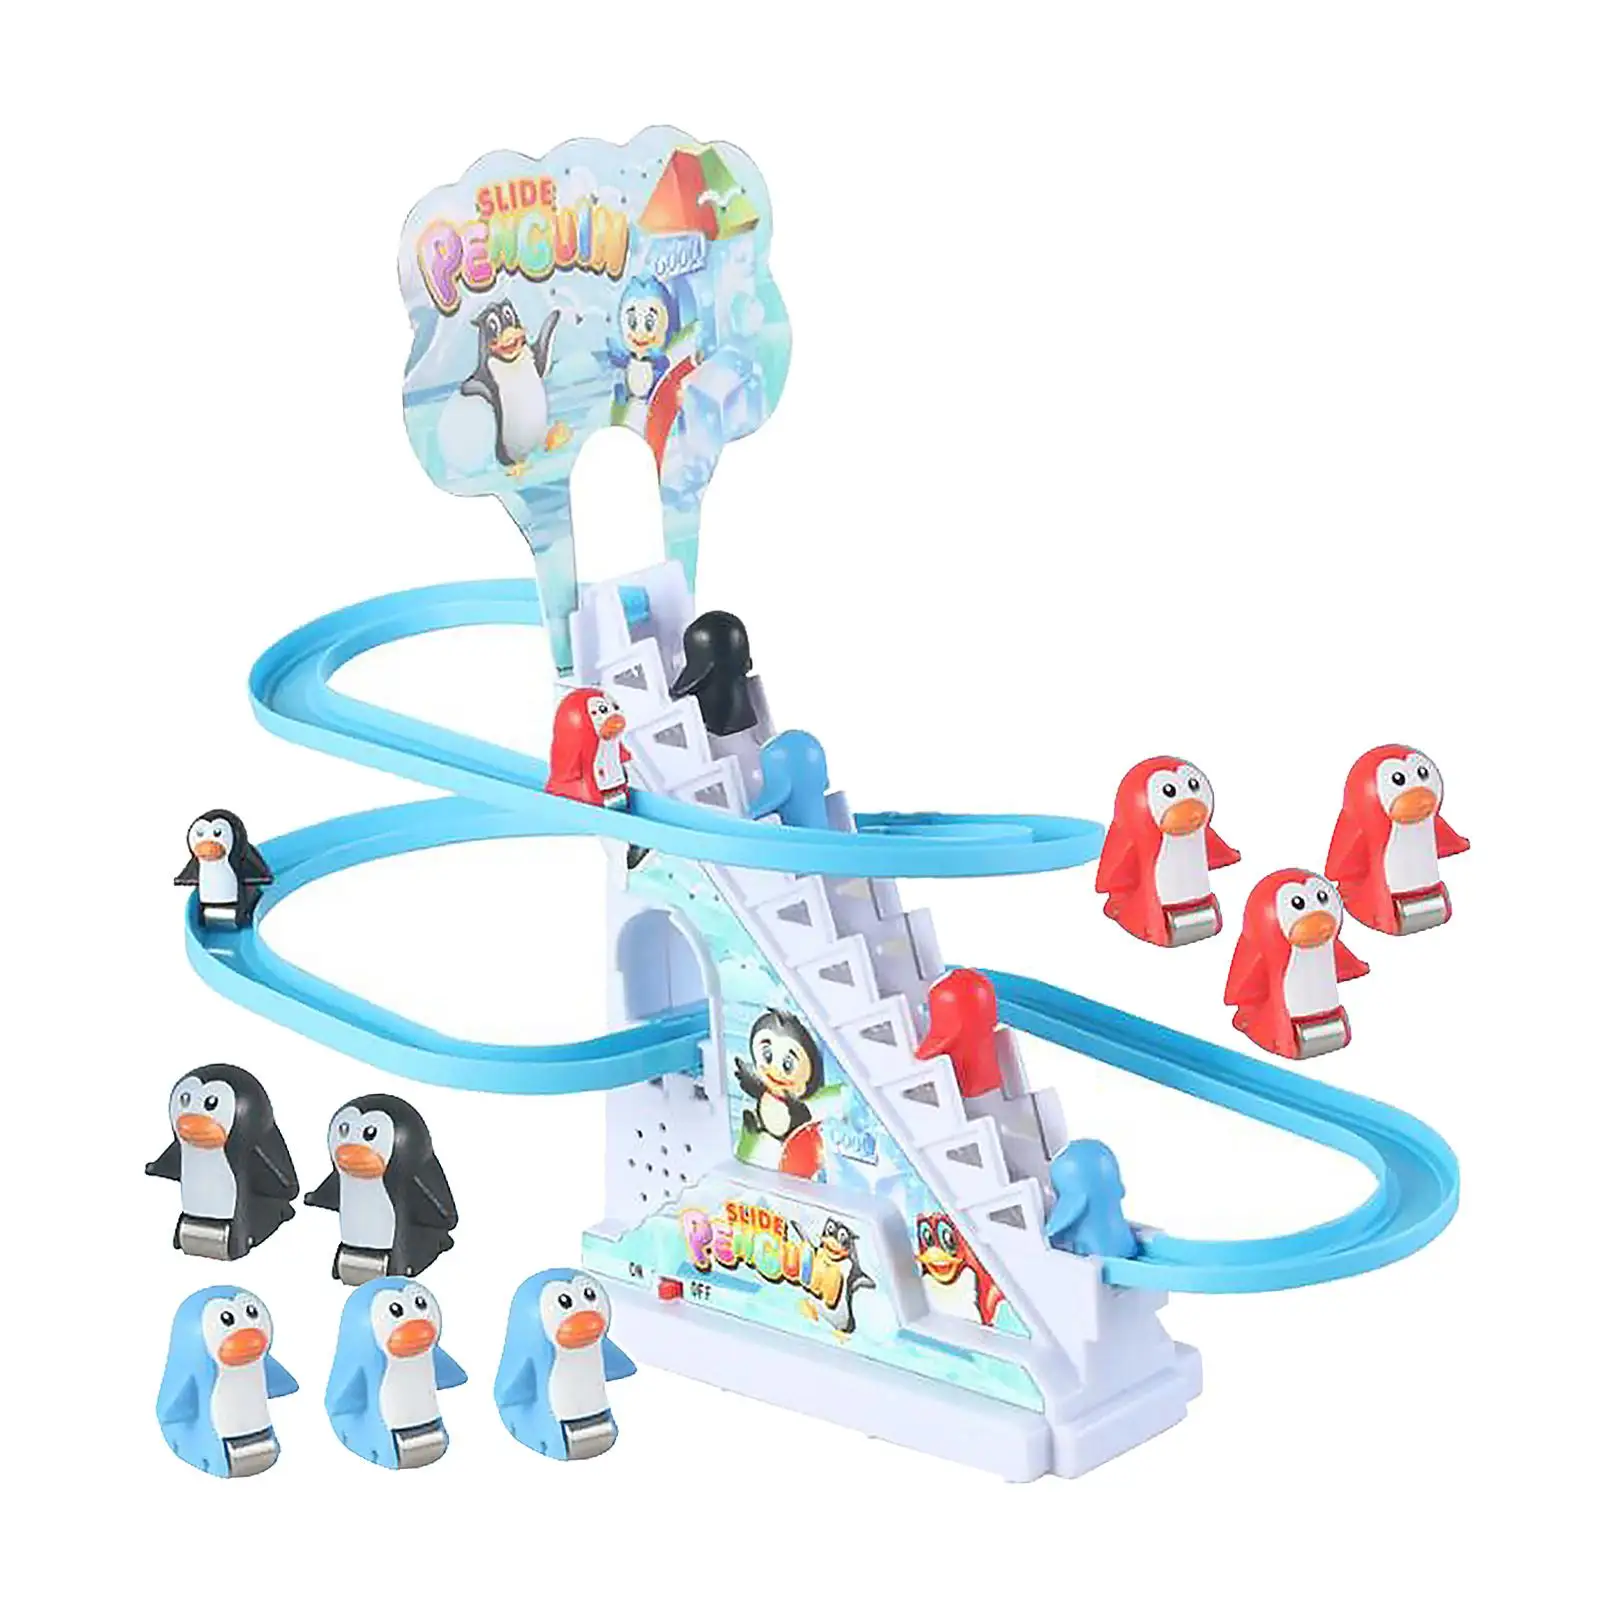 Roller Coaster Toy Penguin Easy to Assemble for Holiday Boys Girls Birthday